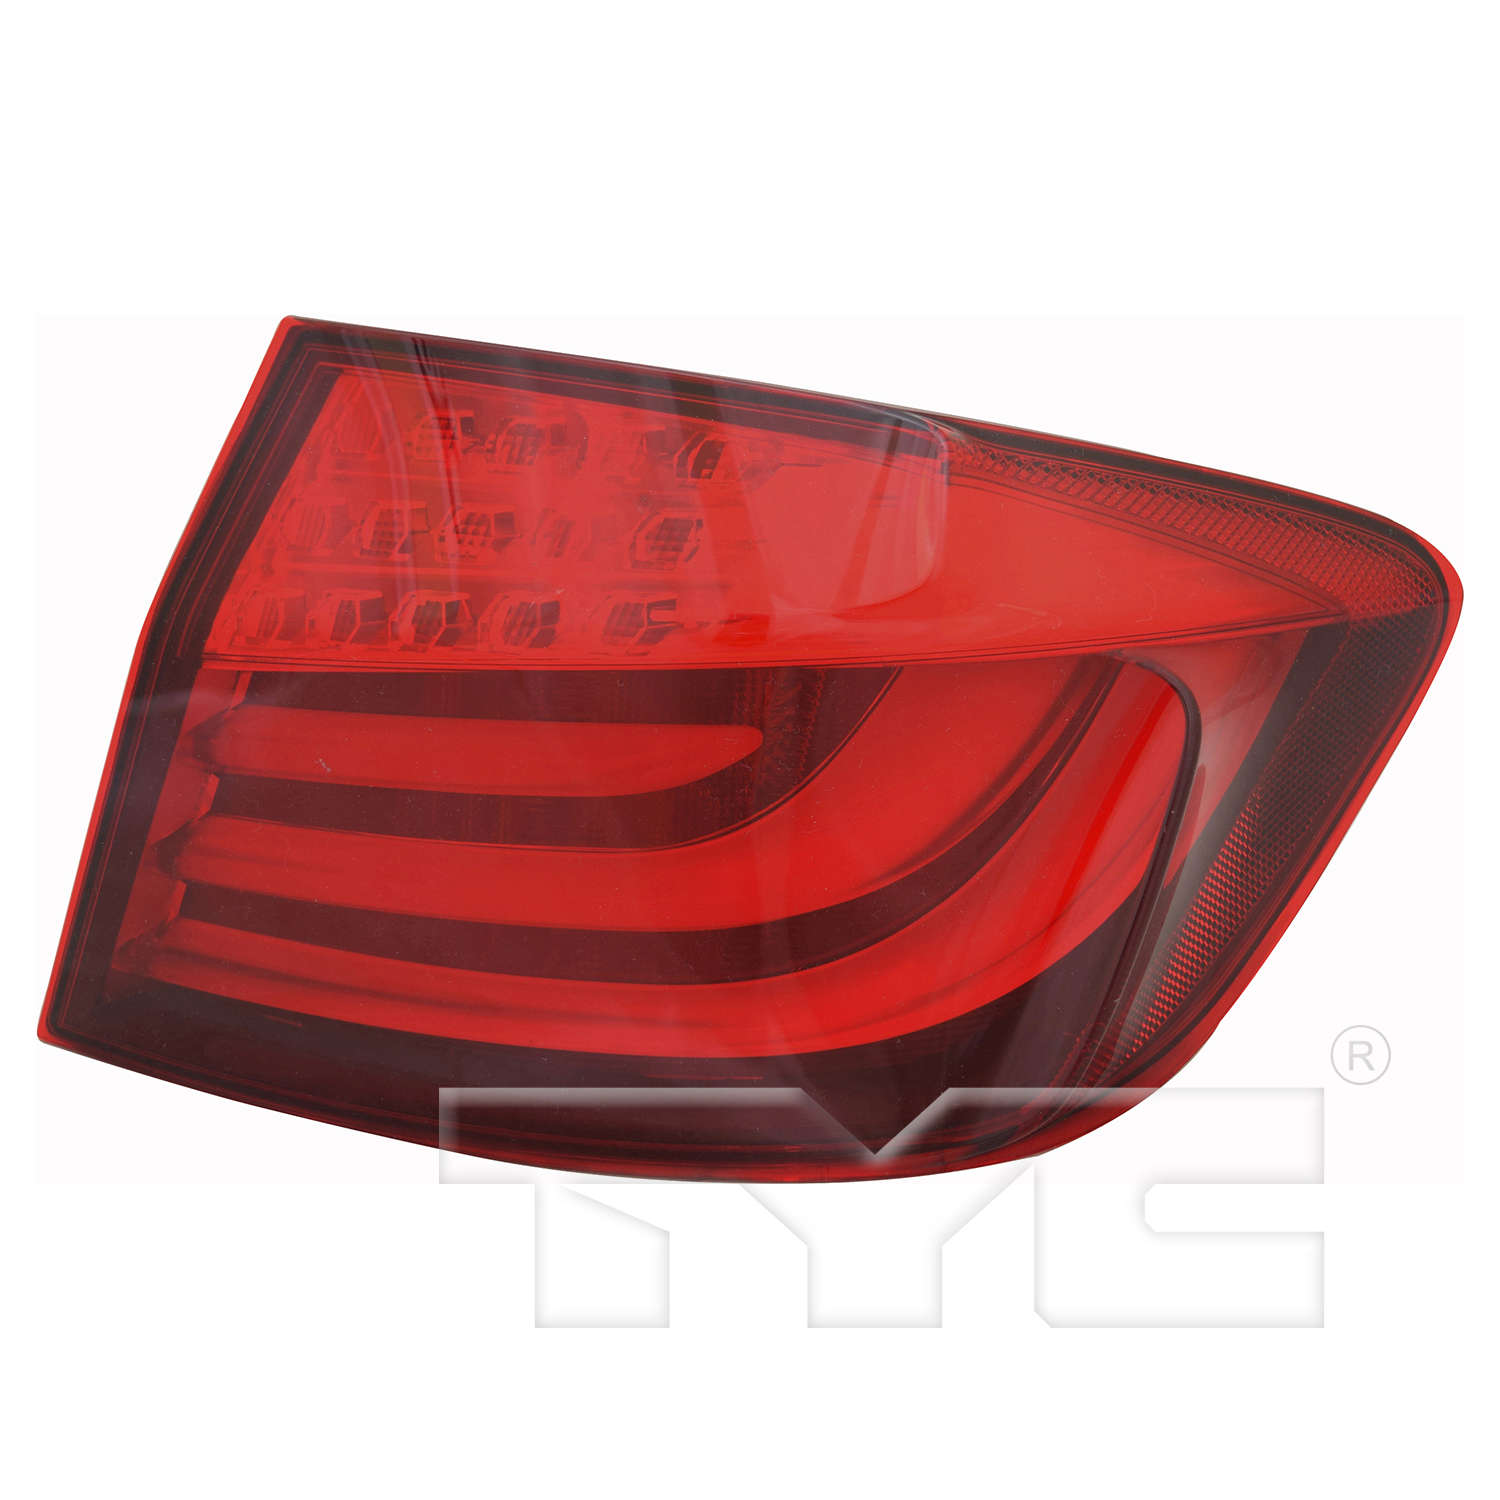 Aftermarket TAILLIGHTS for BMW - 535I, 535i,11-13,RT Taillamp assy outer